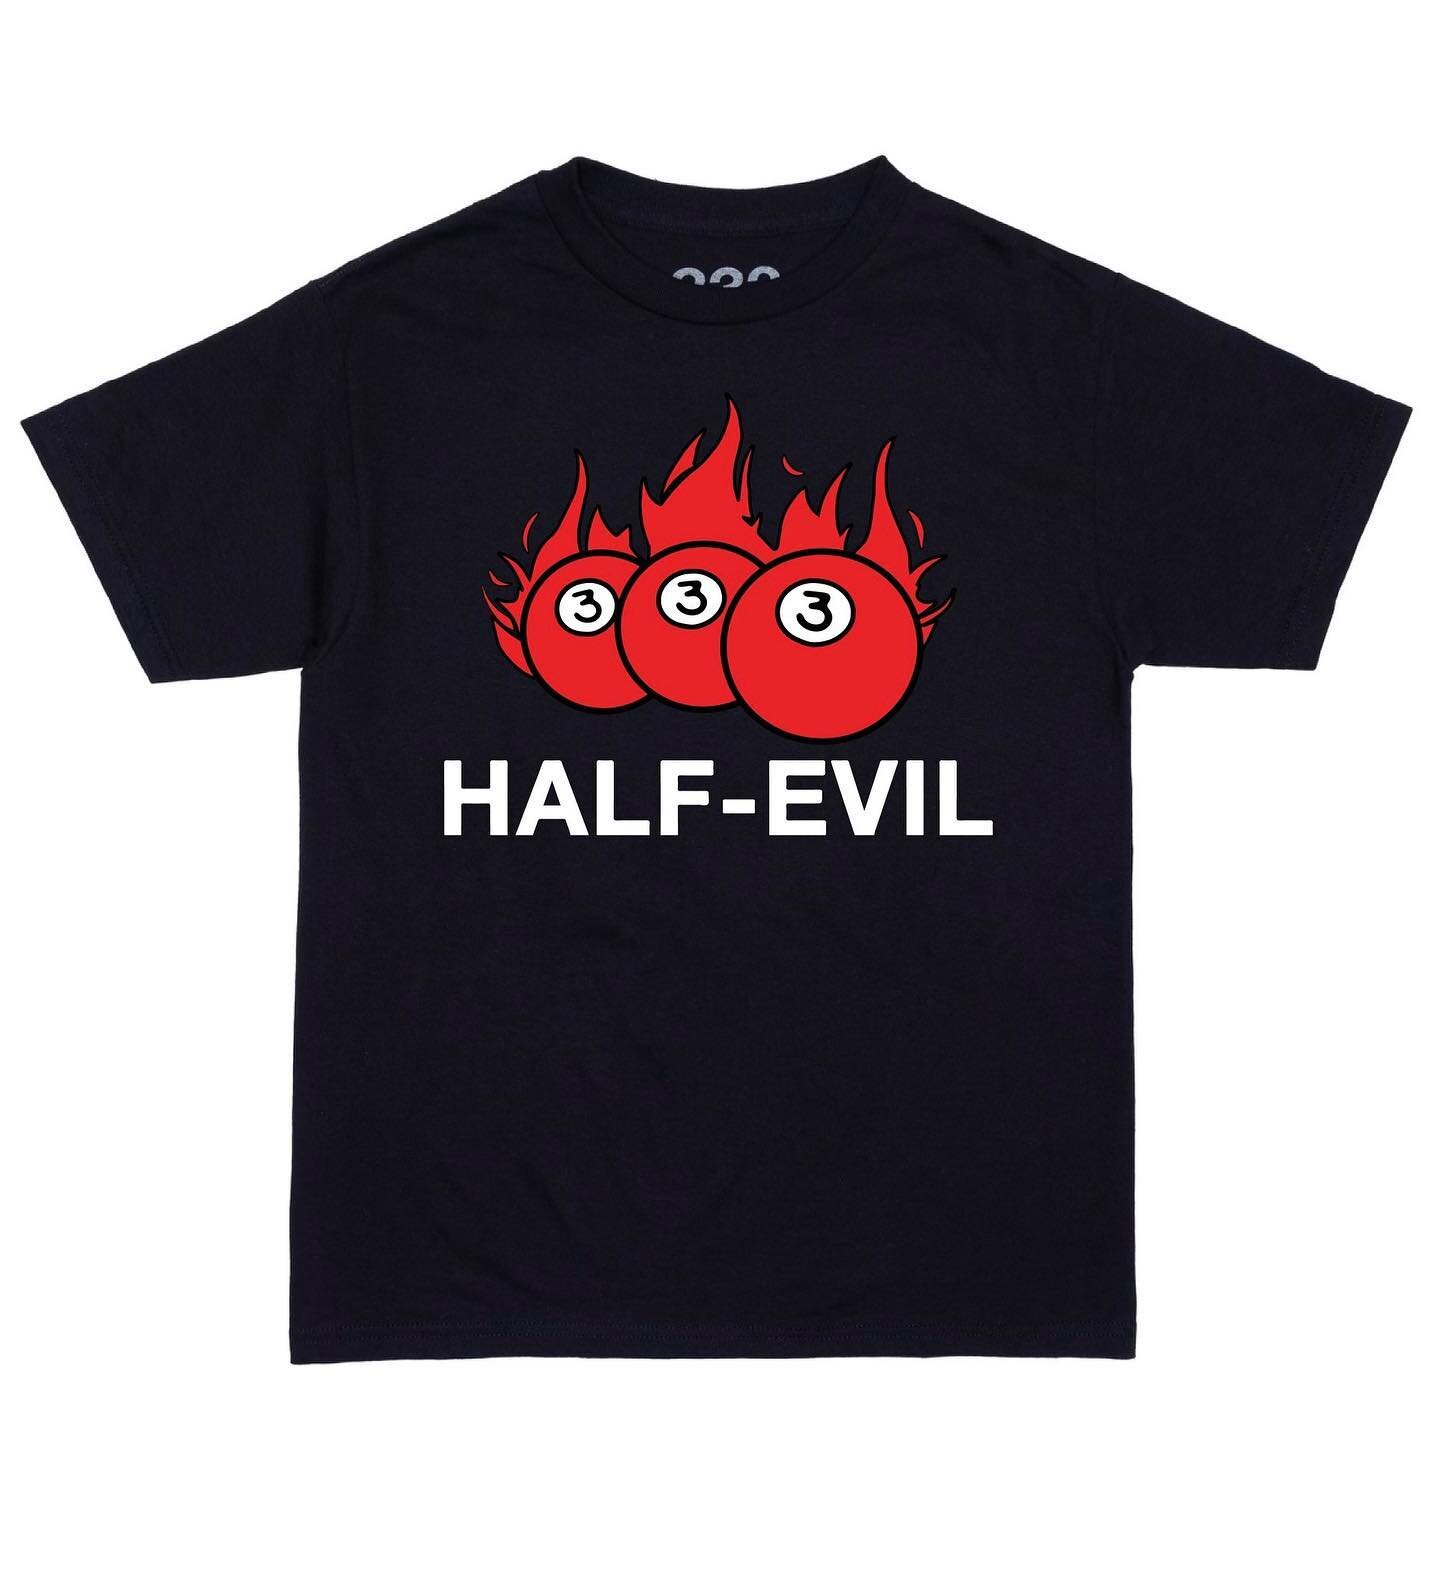 hey, its been years, i hope yall dont mind that i start using this account to post my mock clothing  designs. half evil did a contest to design for their brand and it inspired me, im just gonna start posting mocks for brands i love! 

#streetwear #gr